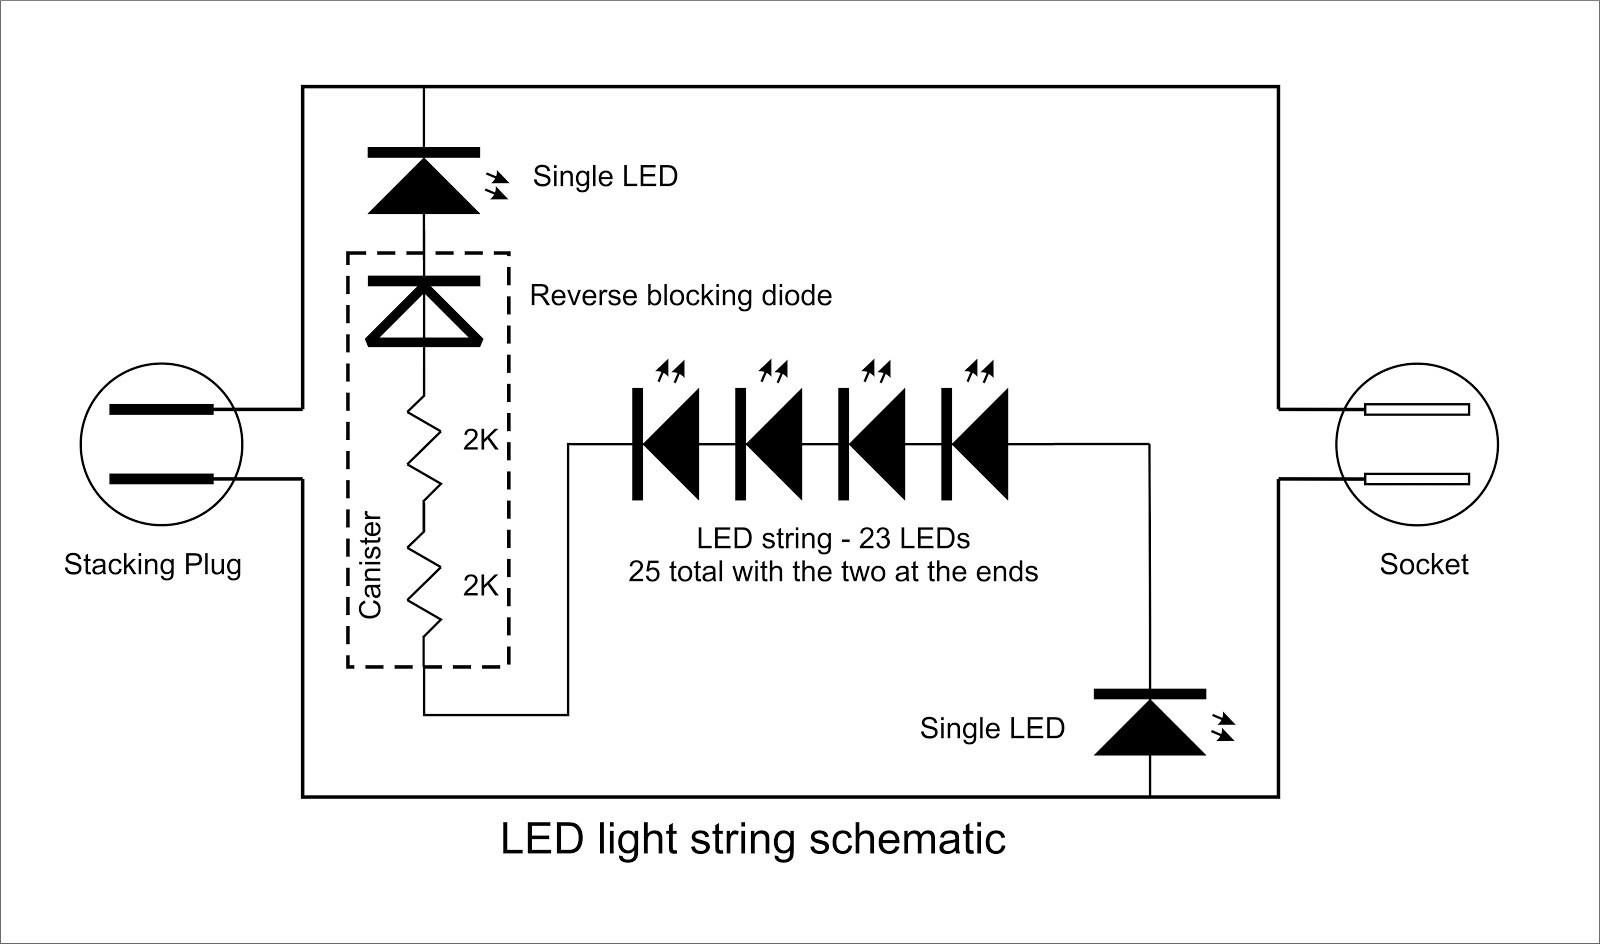 Led Christmas Lights Wiring Schematic | Manual E-Books - Led Christmas Lights Wiring Diagram